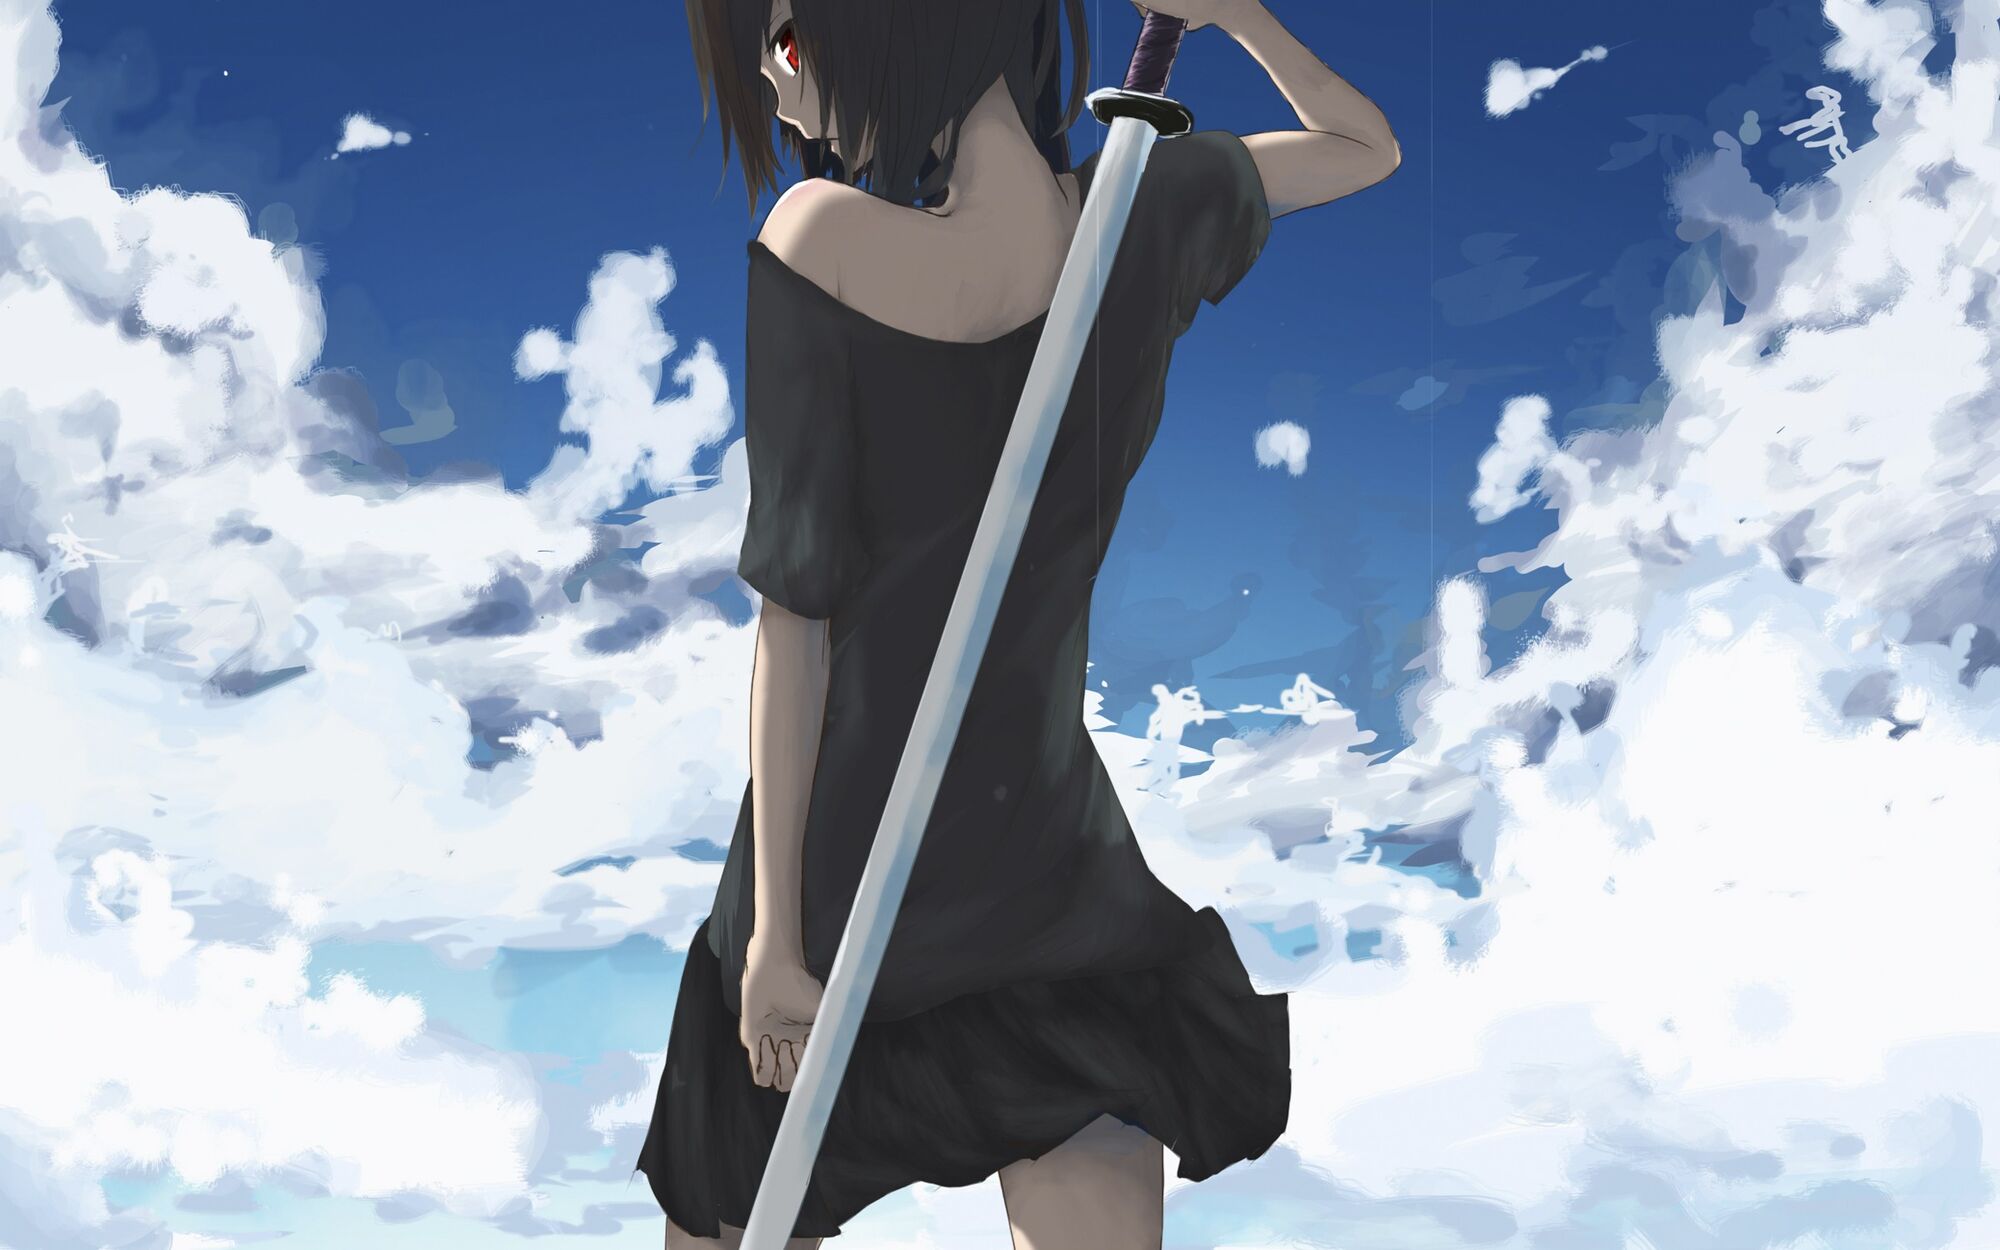 Image Red Eyes Short Hair Anime Skyscapes Girls With Swords